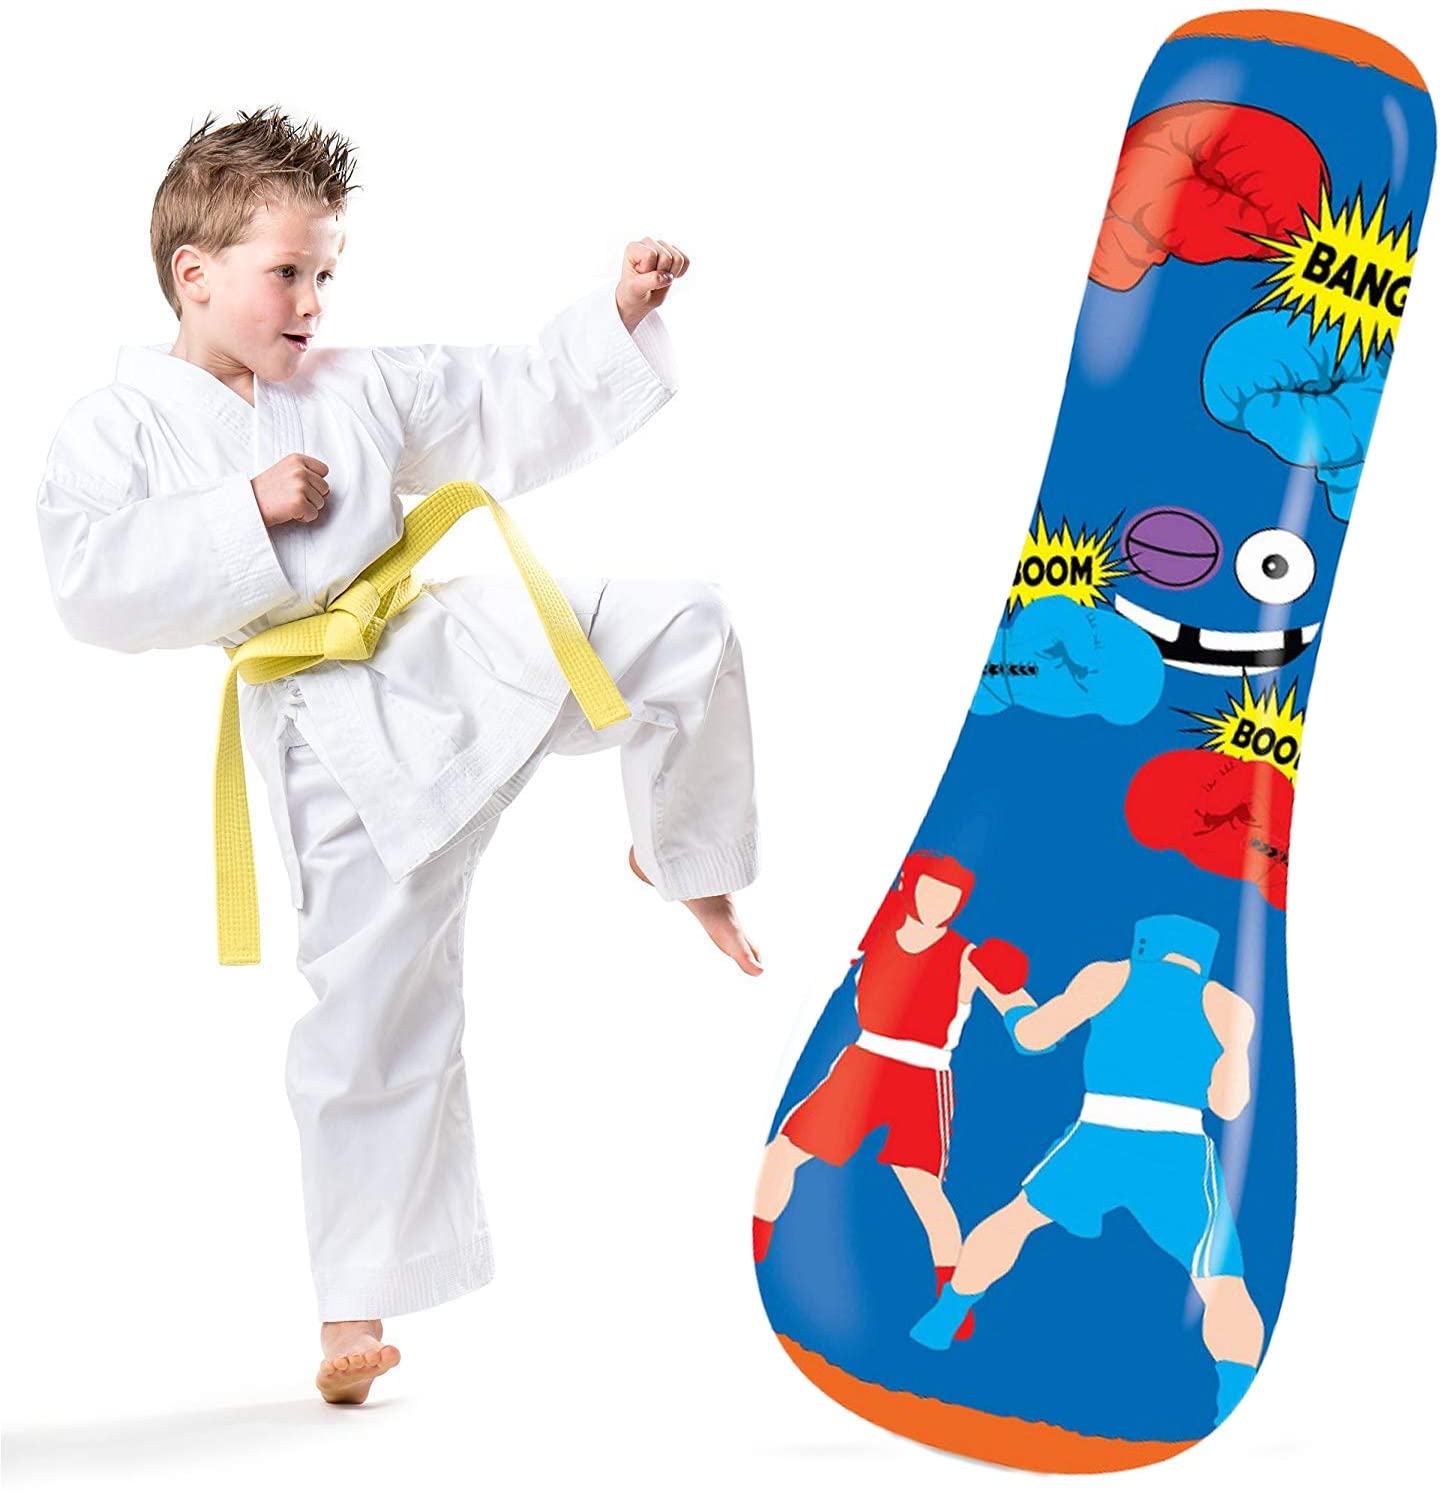 ''Hoovy Inflatable Punching Bag for Kids: Free Standing Boxing TOY for Children, Air Bop Bag for Boys